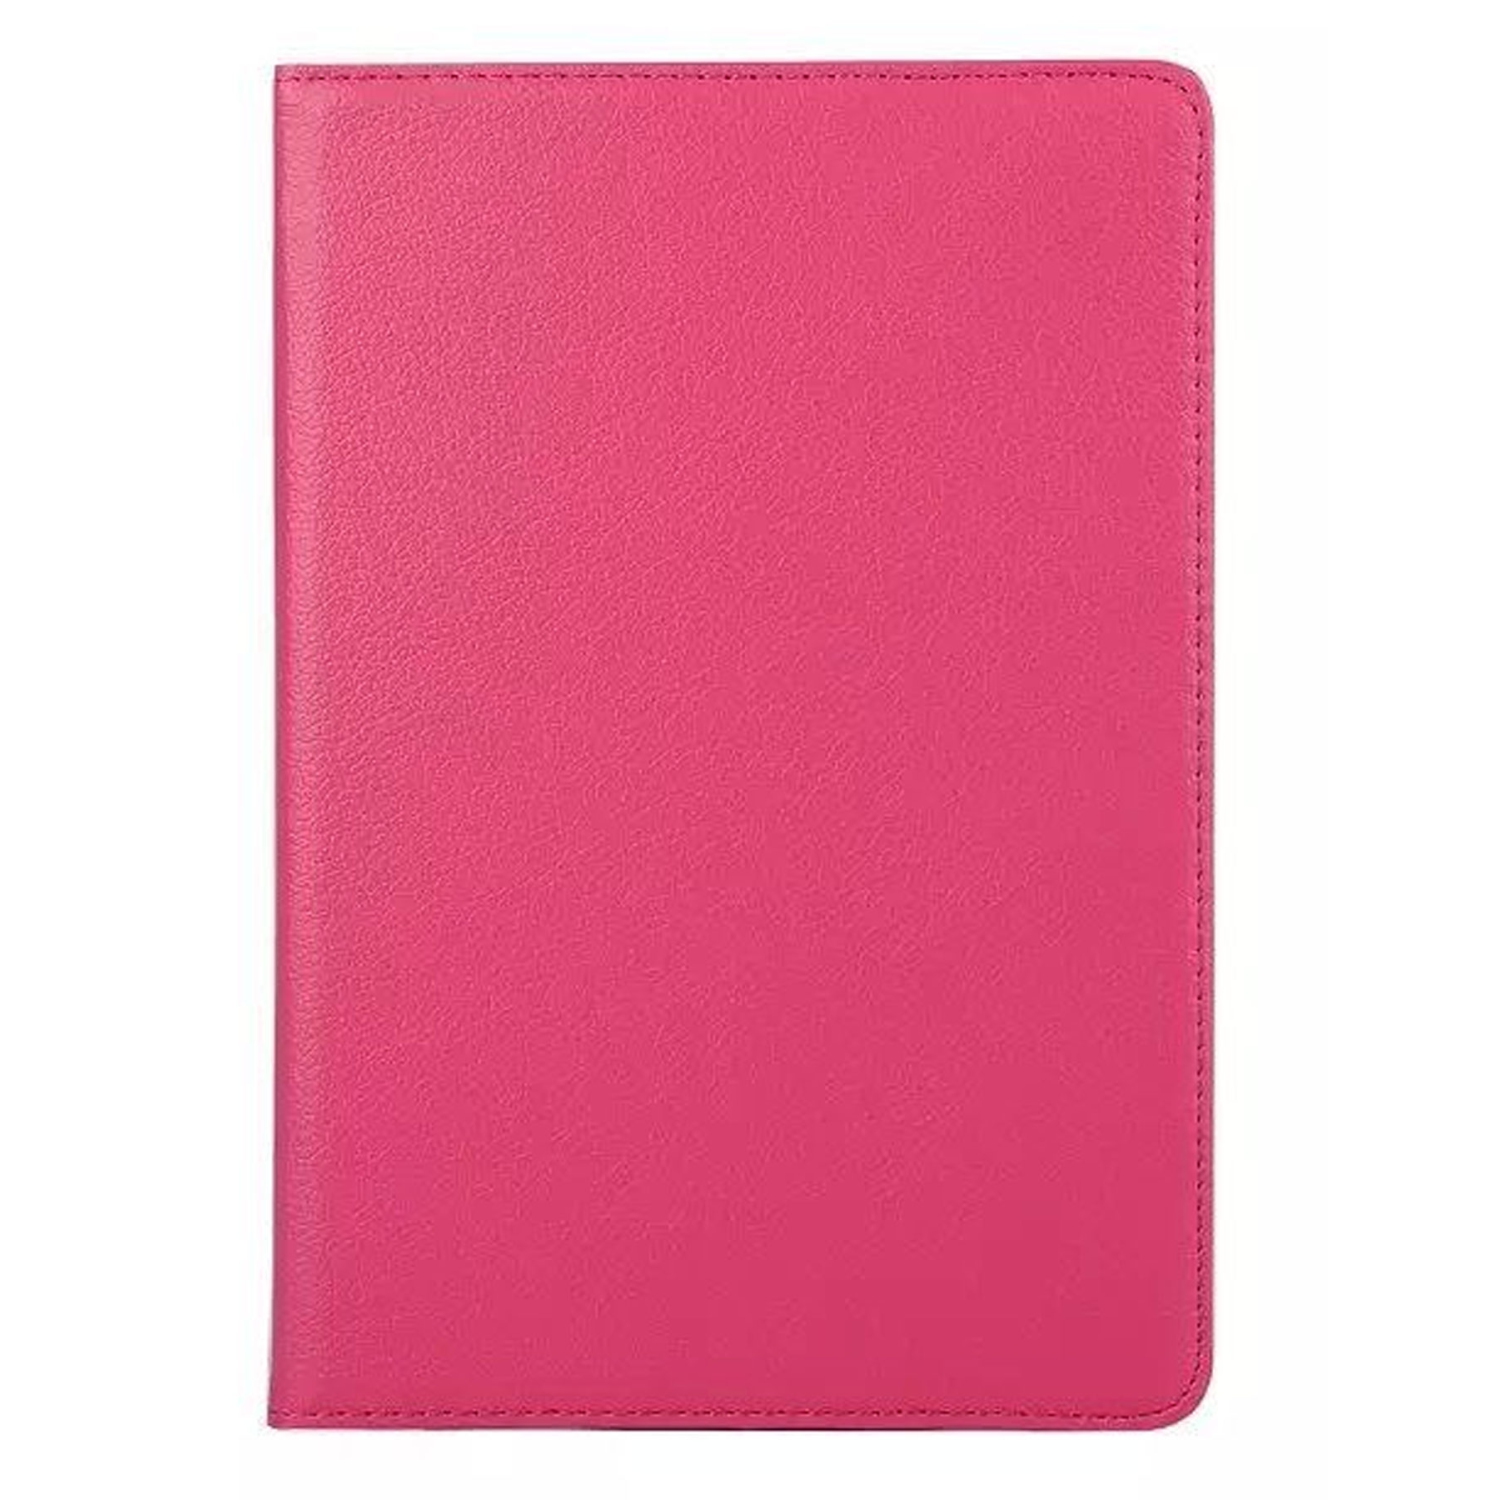 Rotating Case for Samsung Galaxy Tab S3 - 9.7" (T820) - Hot Pink